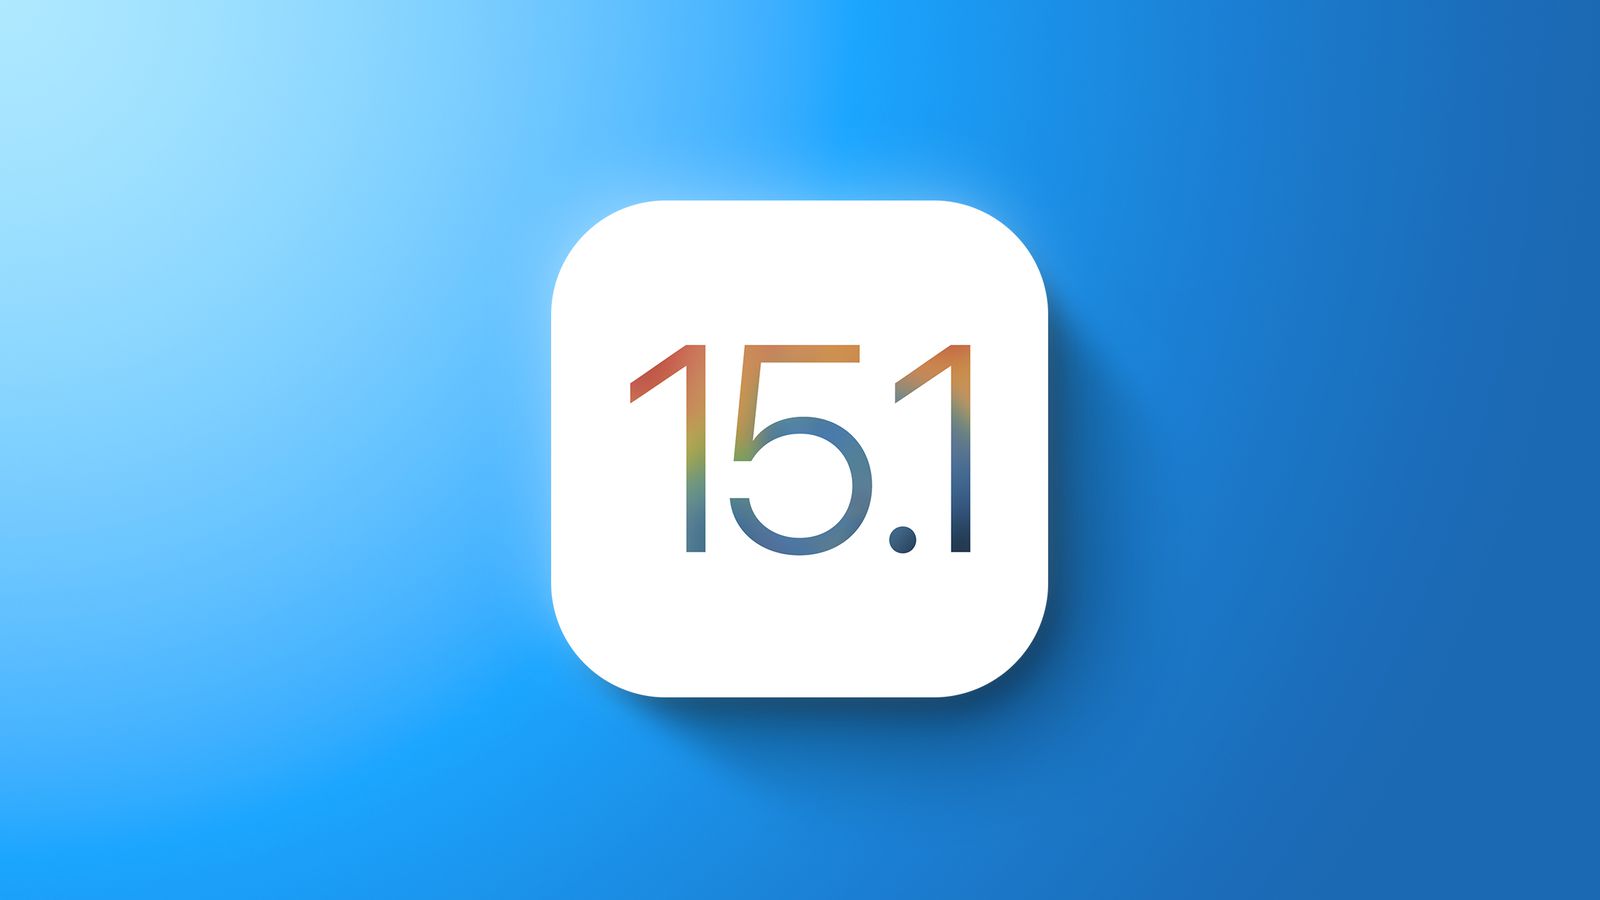 Apple has released the third beta of iOS 15.1, with several new features added to the firmware for iPhone 13 Pro owners